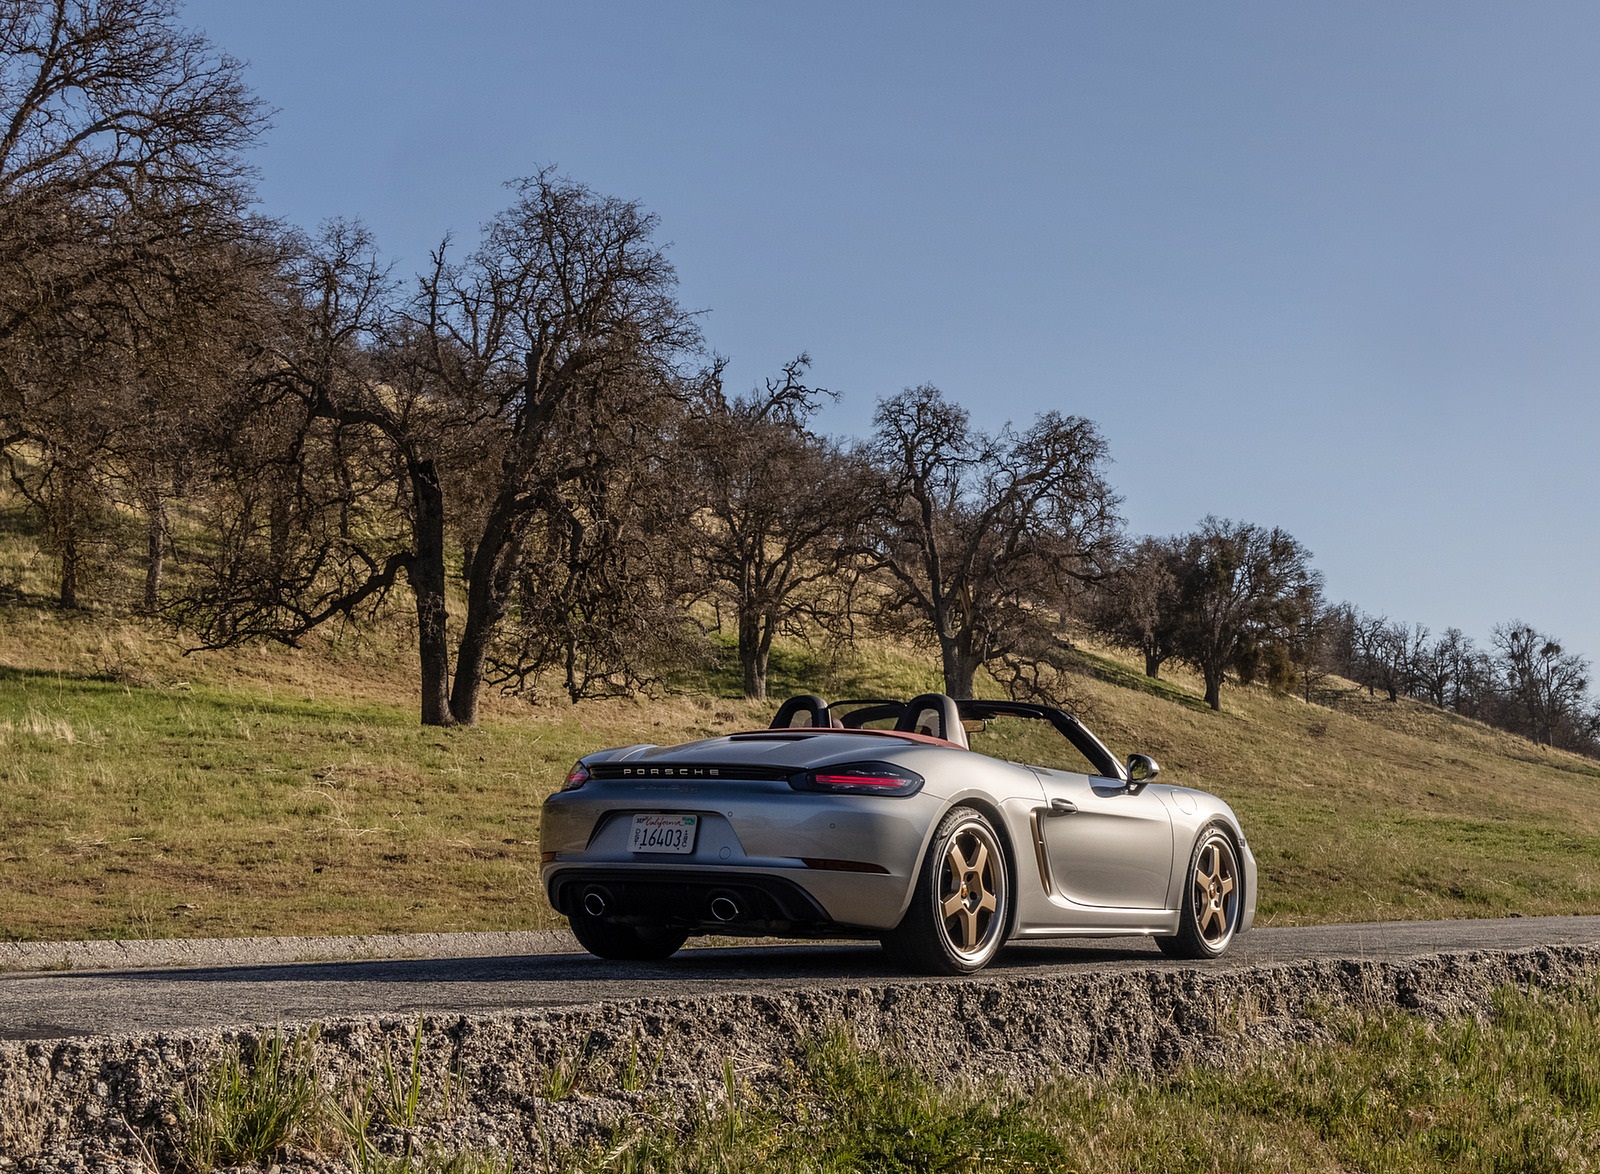 2021 Porsche 718 Boxster GTS 4.0 25 Years (Color: GT Silver) Rear Three-Quarter Wallpapers  #56 of 185